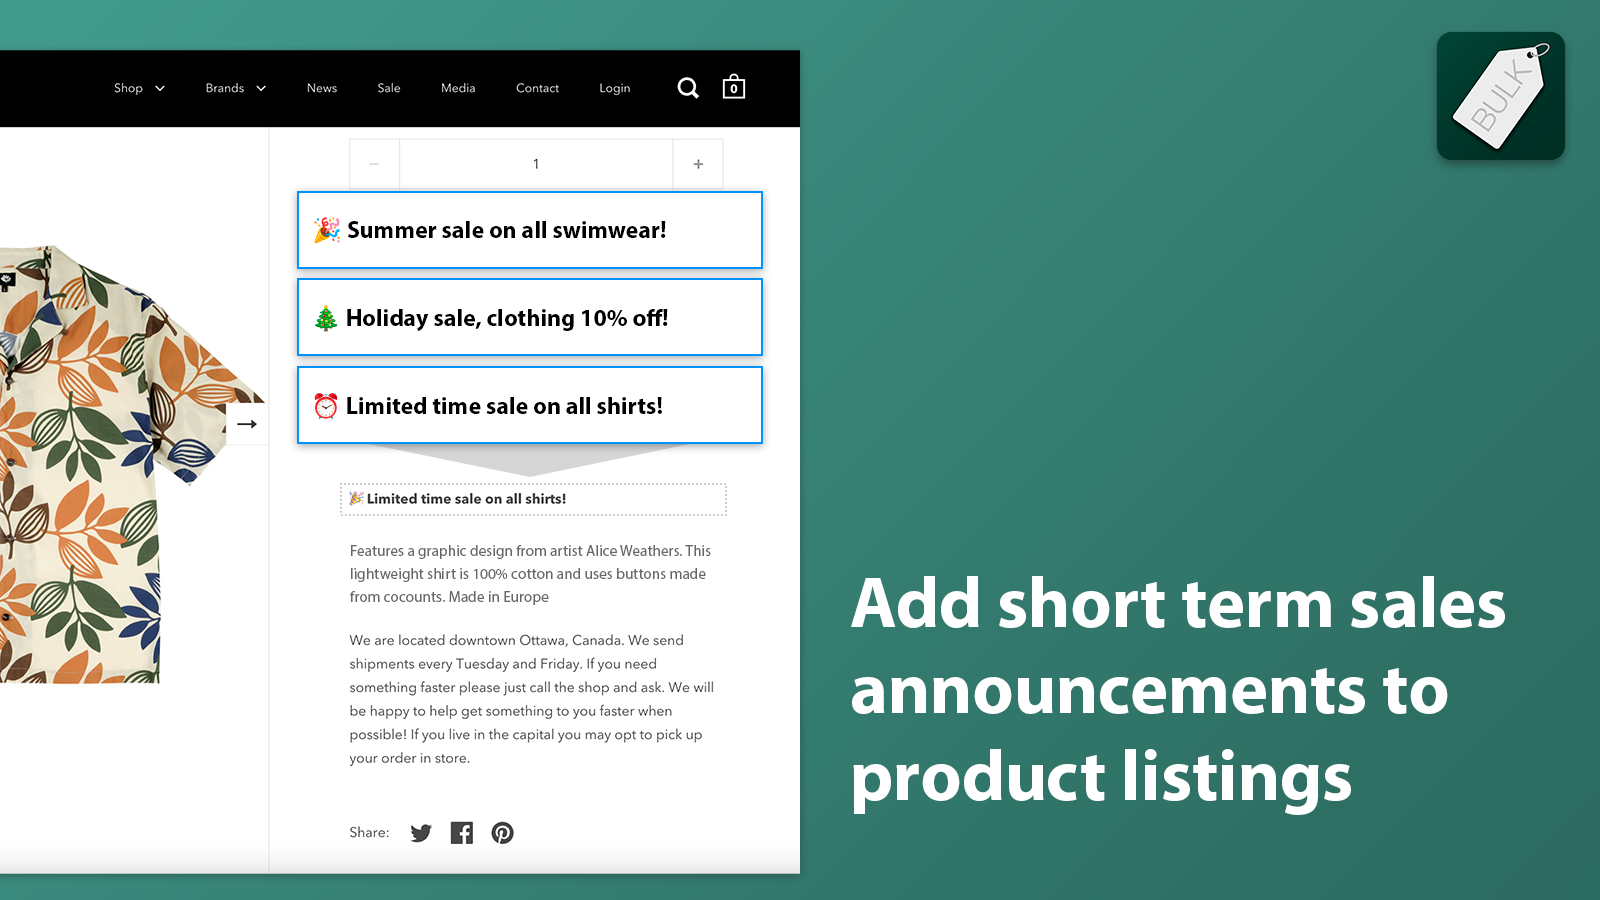 Add short term sales announcements to product listings